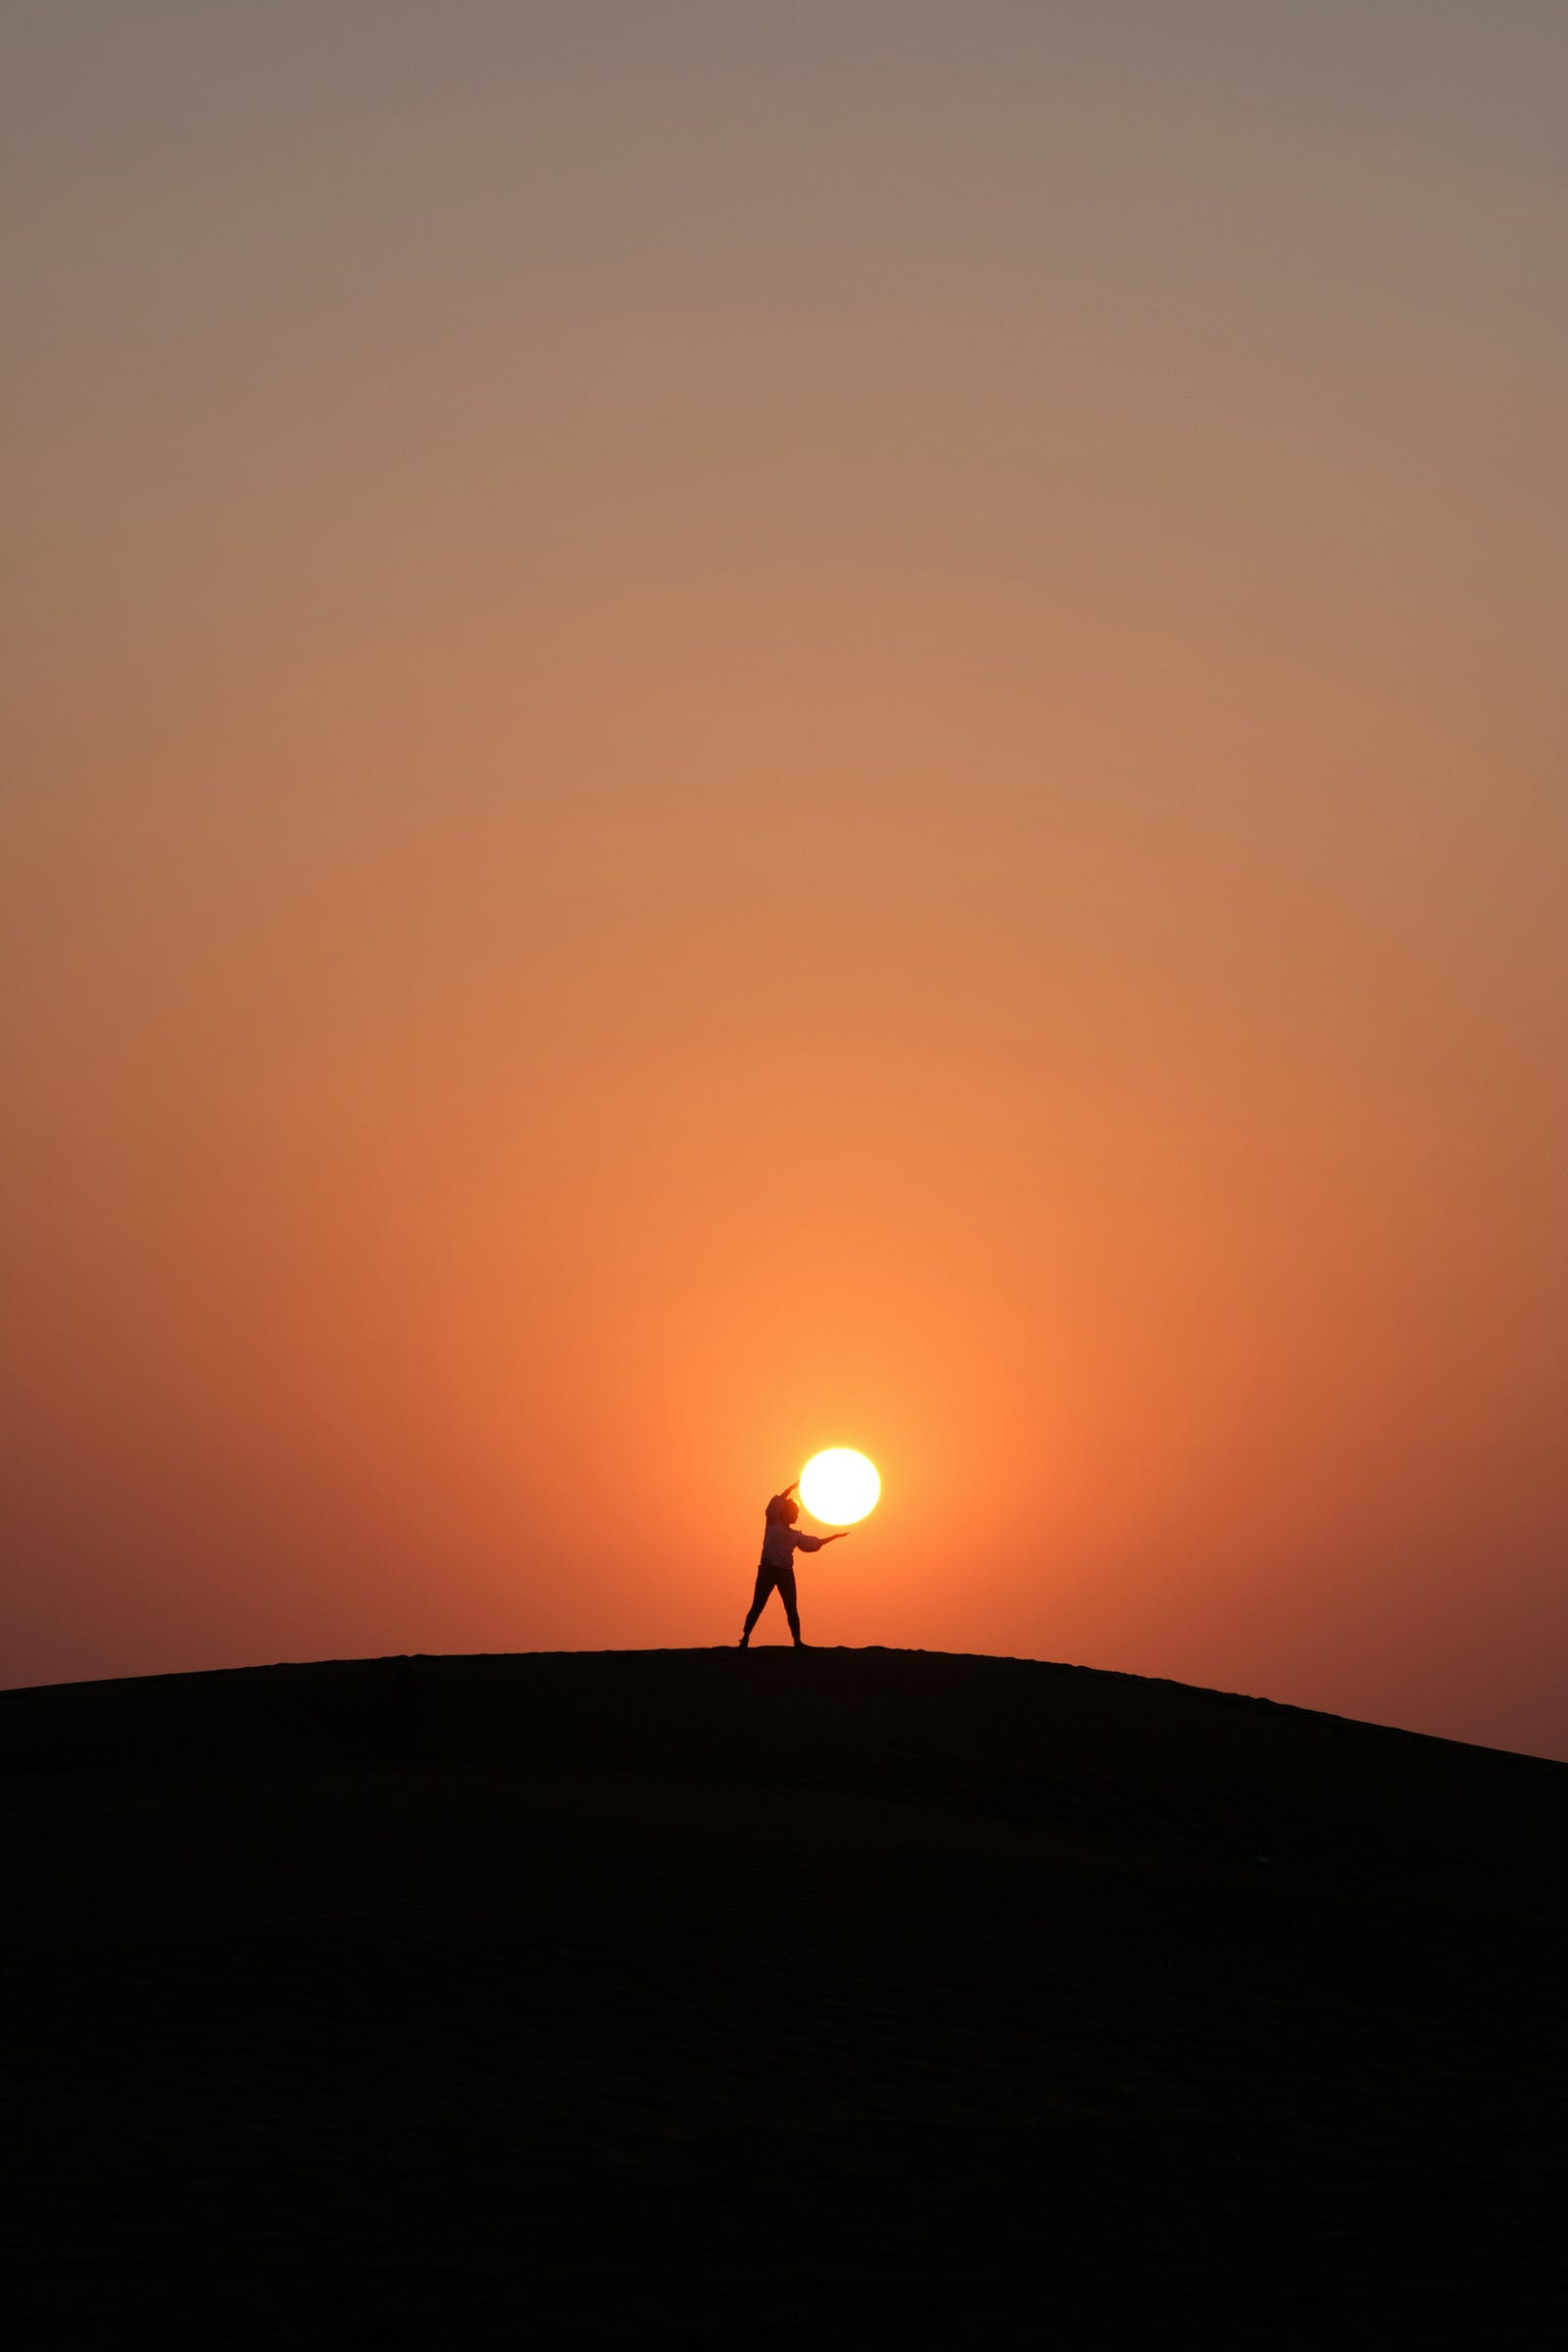 A person in the distance is in silhouette as they extend their arms to embrace the setting sun.